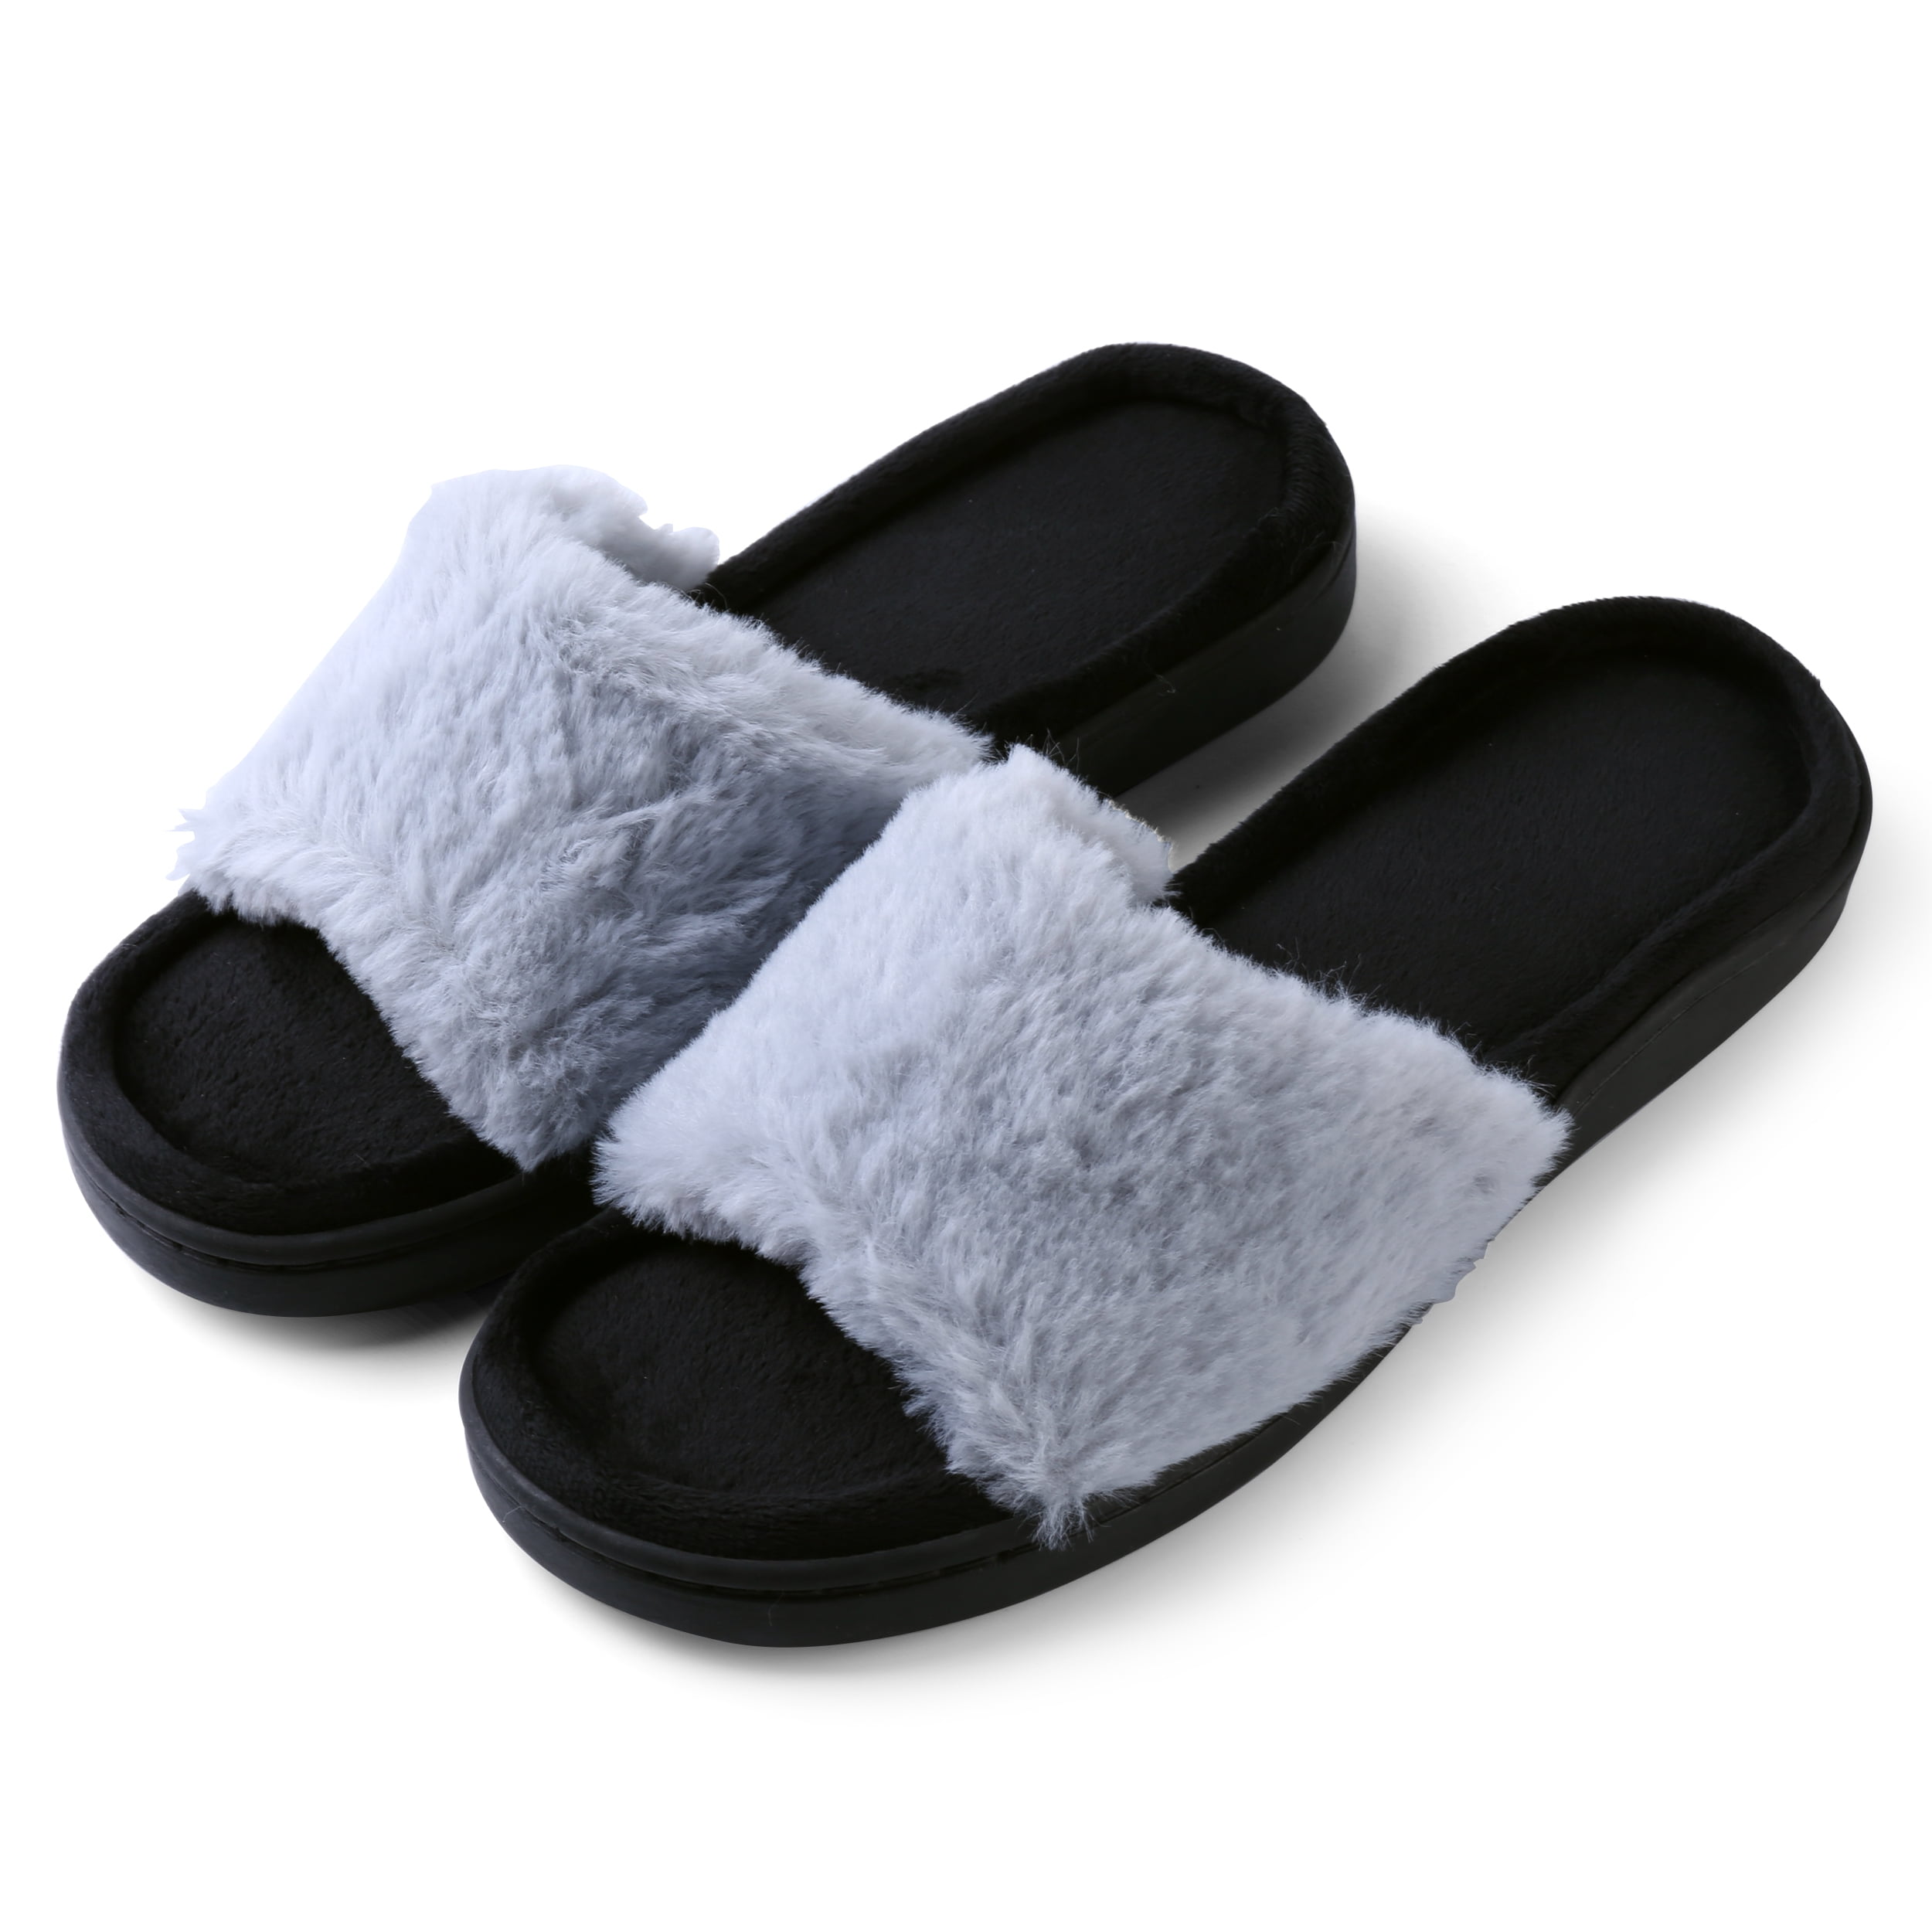 Aerusi - Women's Light And Fluffy Soft Plush Sandal Slippers with No ...